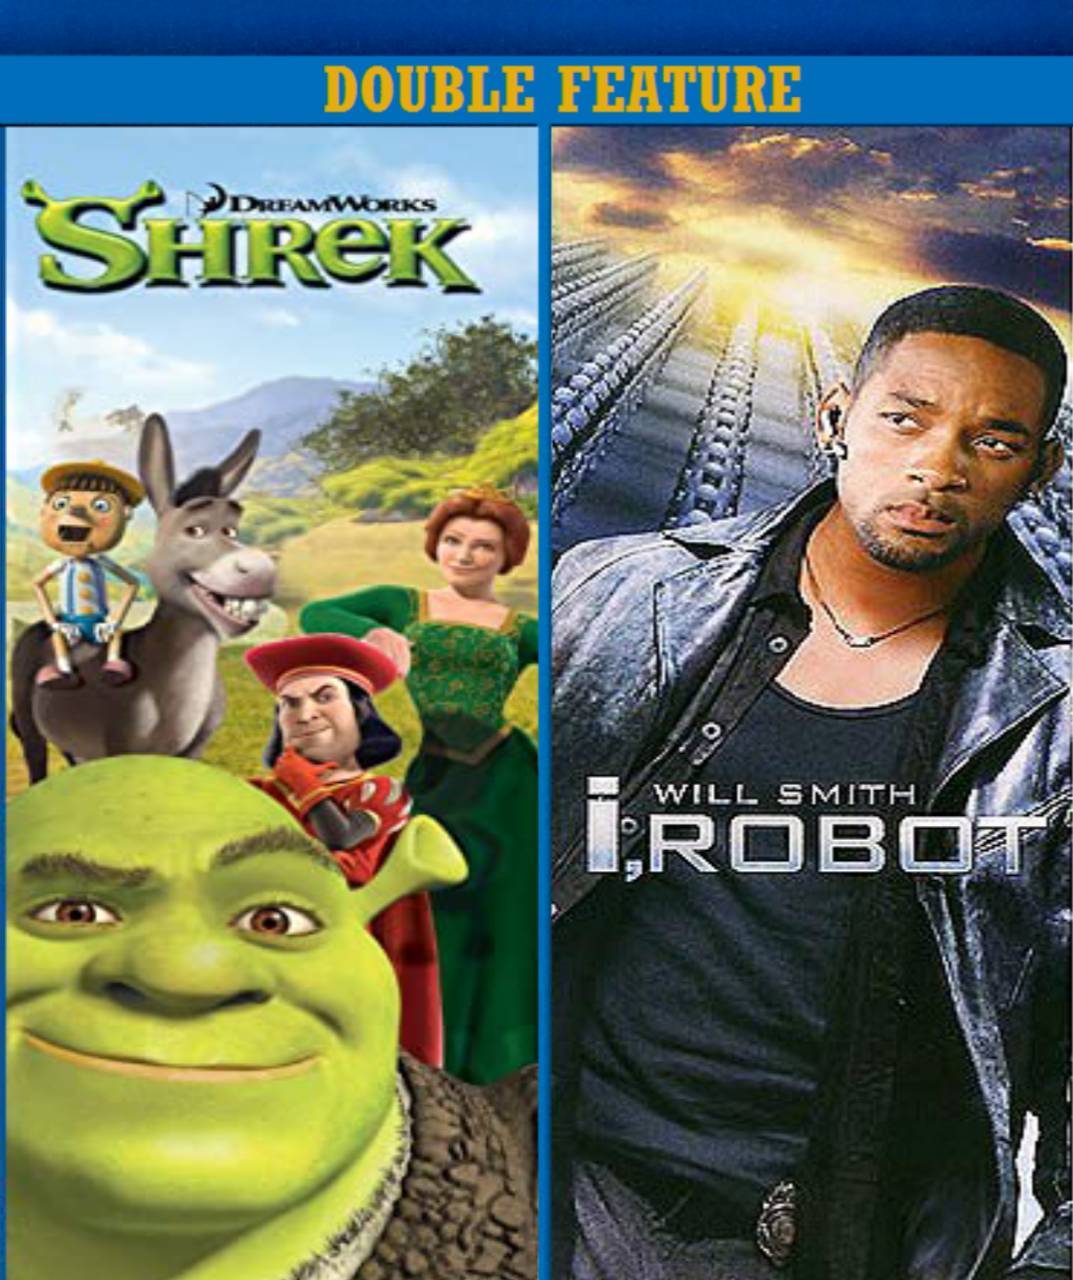 Double Feature Shrek/I, Robot by myjosephpatty2002 on DeviantArt